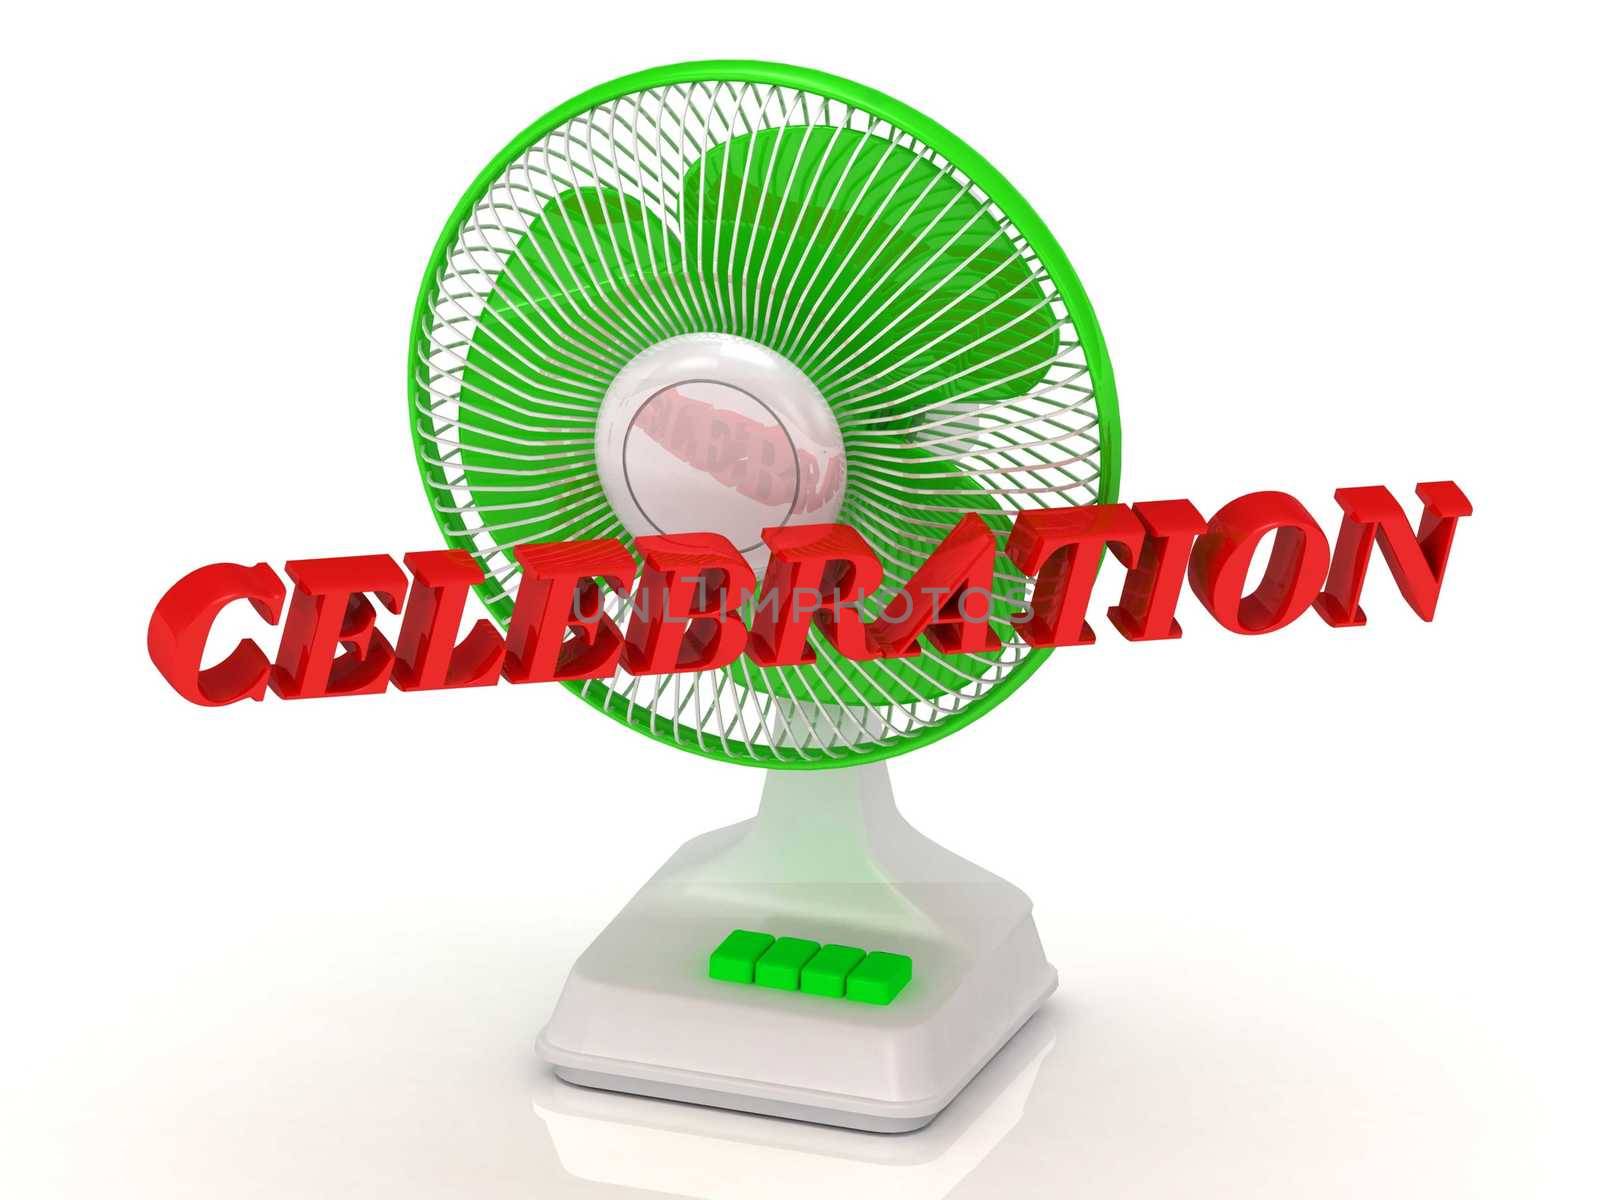 CELEBRATION- Green Fan propeller and bright color letters by GreenMost